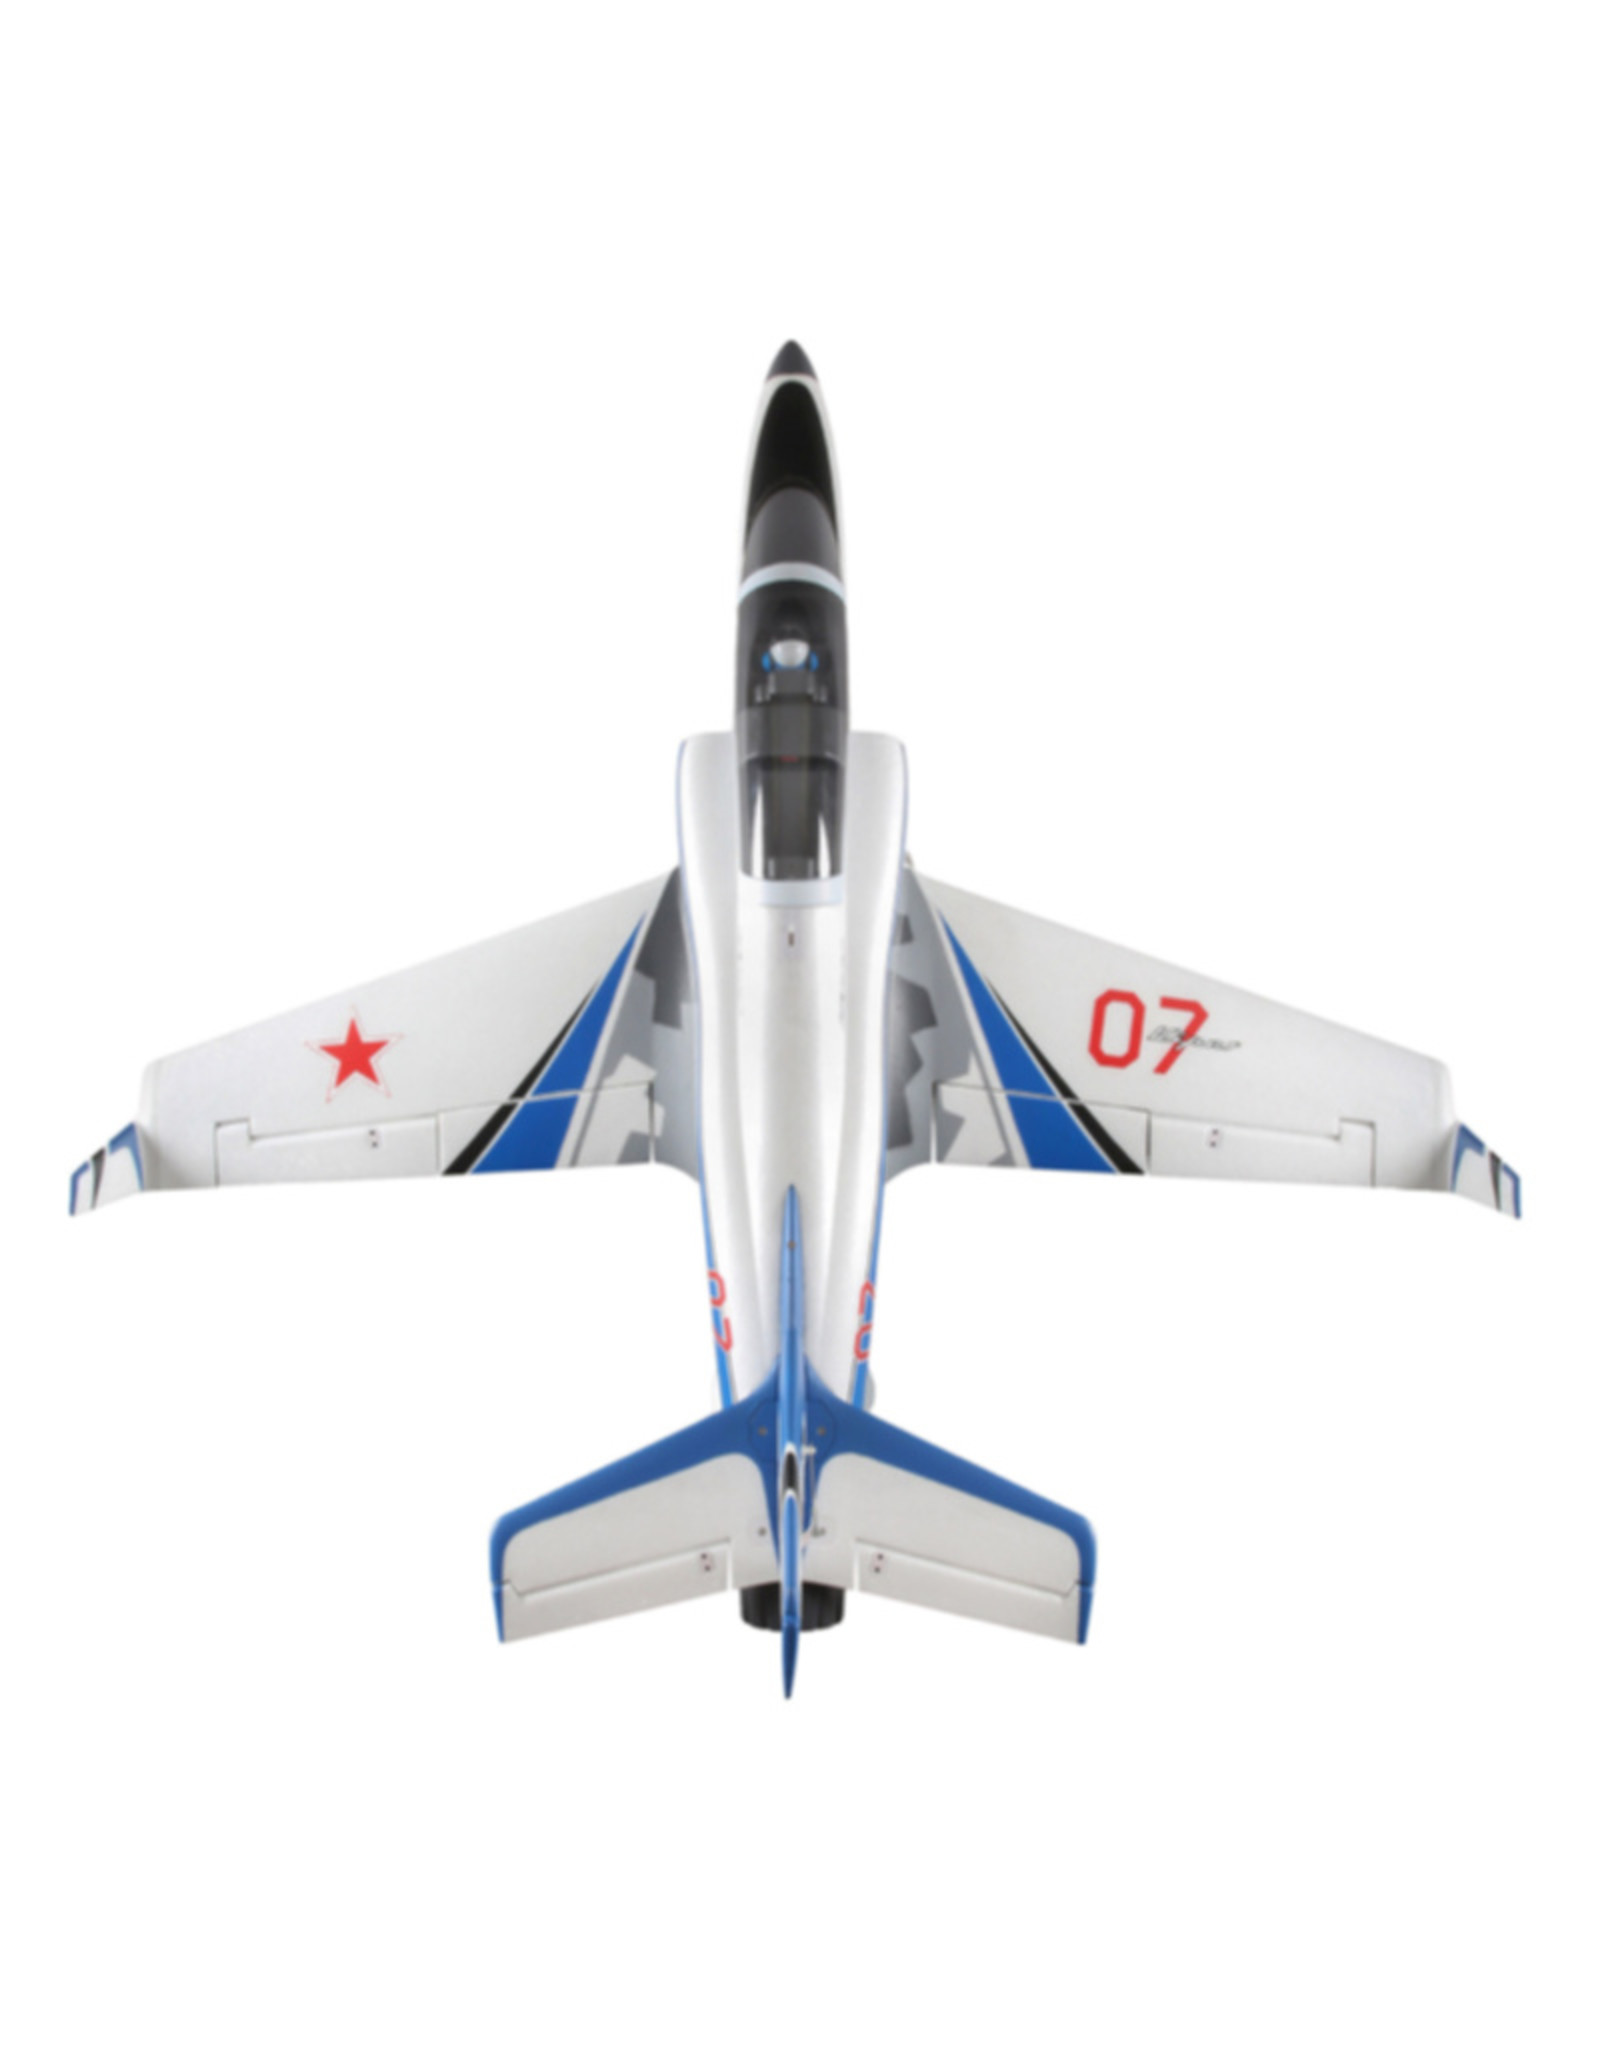 eflite EFL77500 Viper 70mm EDF Jet BNF Basic with AS3X and SAFE Select